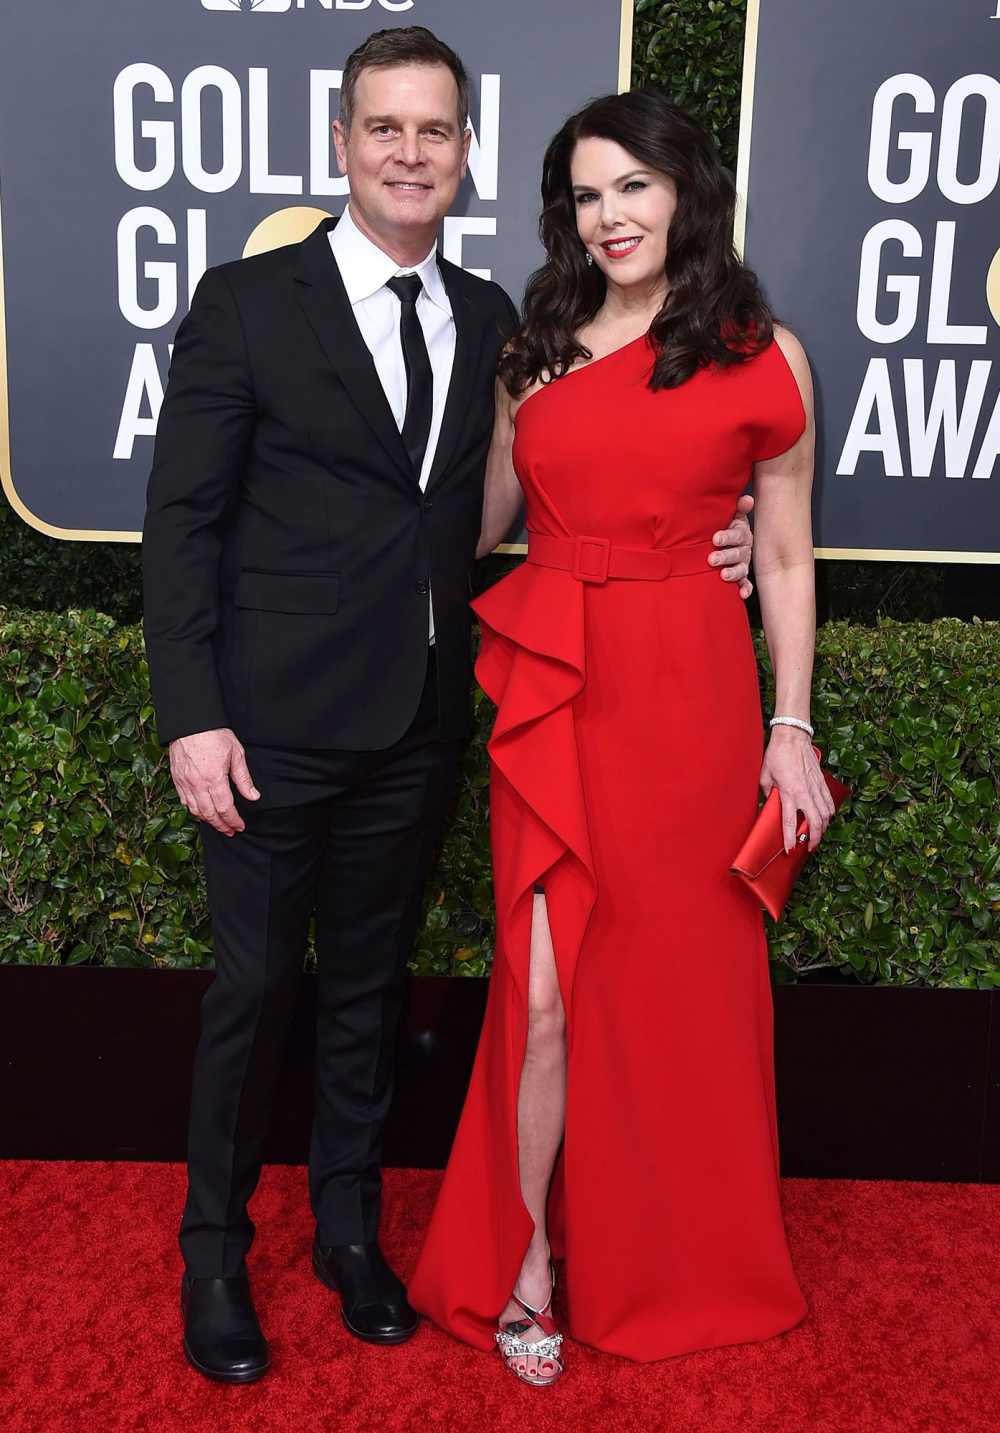 Peter Krause and Lauren Graham Date Night At Golden Globes 2020